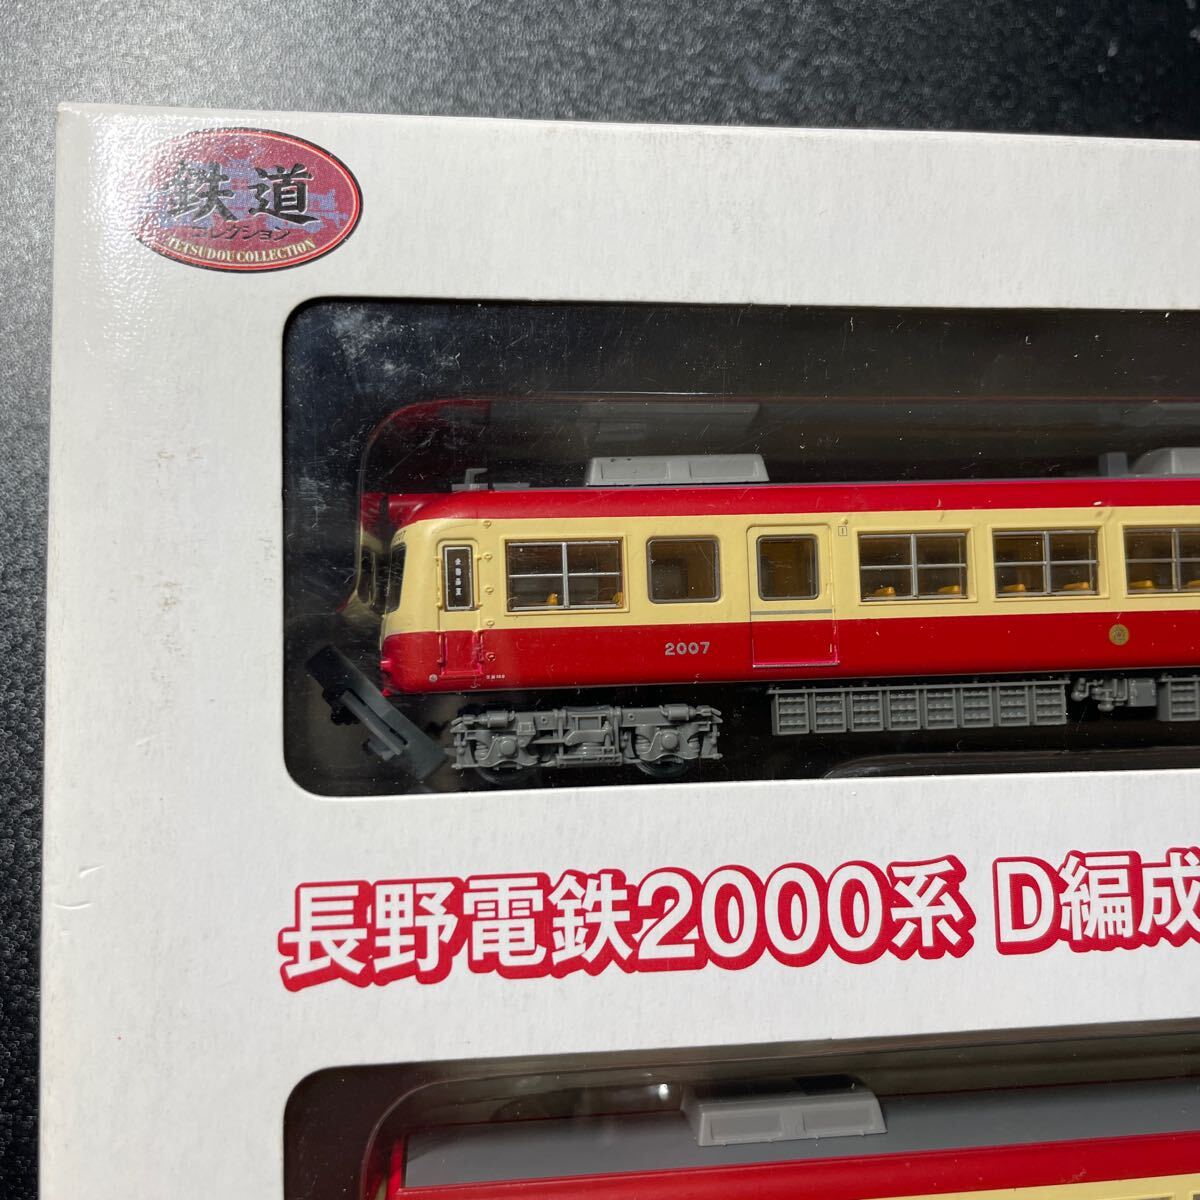 TOMYTEC railroad collection Nagano electro- iron 2000 series A compilation .D compilation . each 3 both set iron kore railroad model Tommy Tec N gauge 